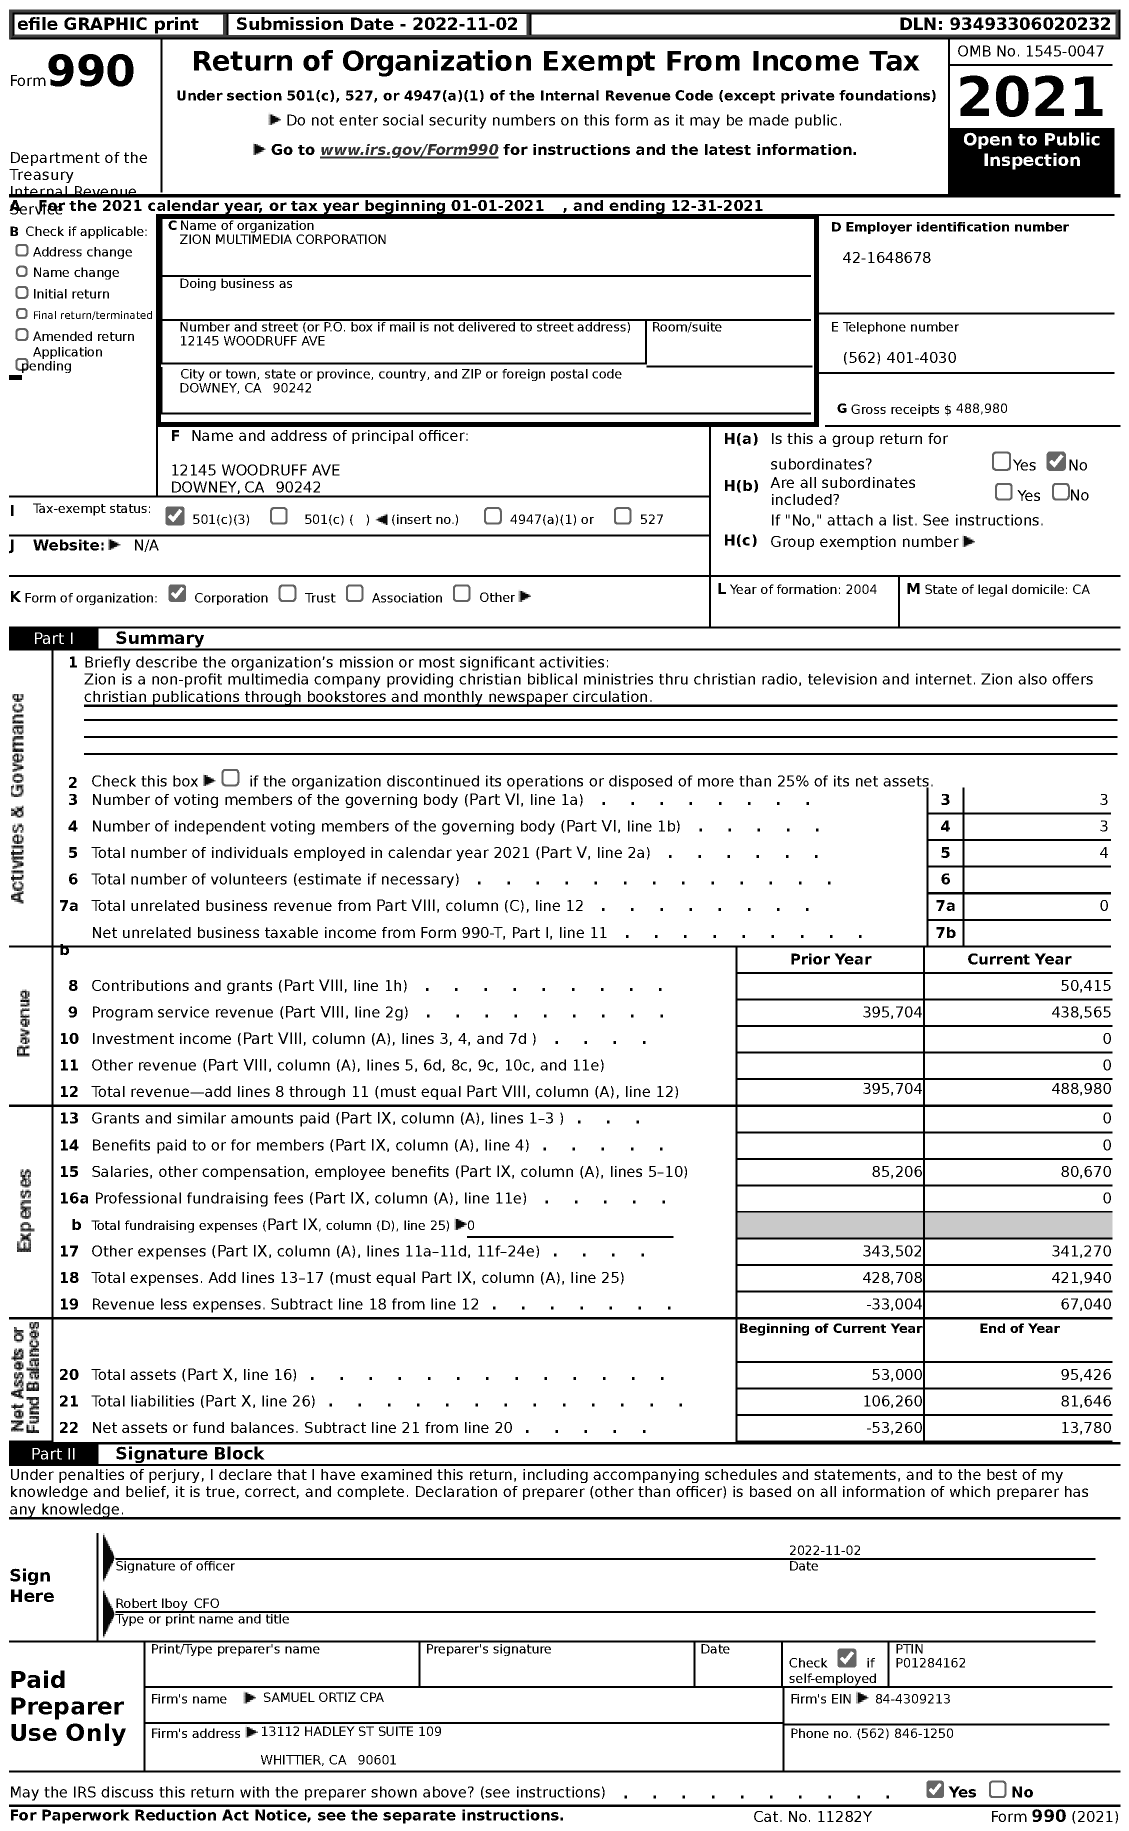 Image of first page of 2021 Form 990 for Zion Multimedia Corporation